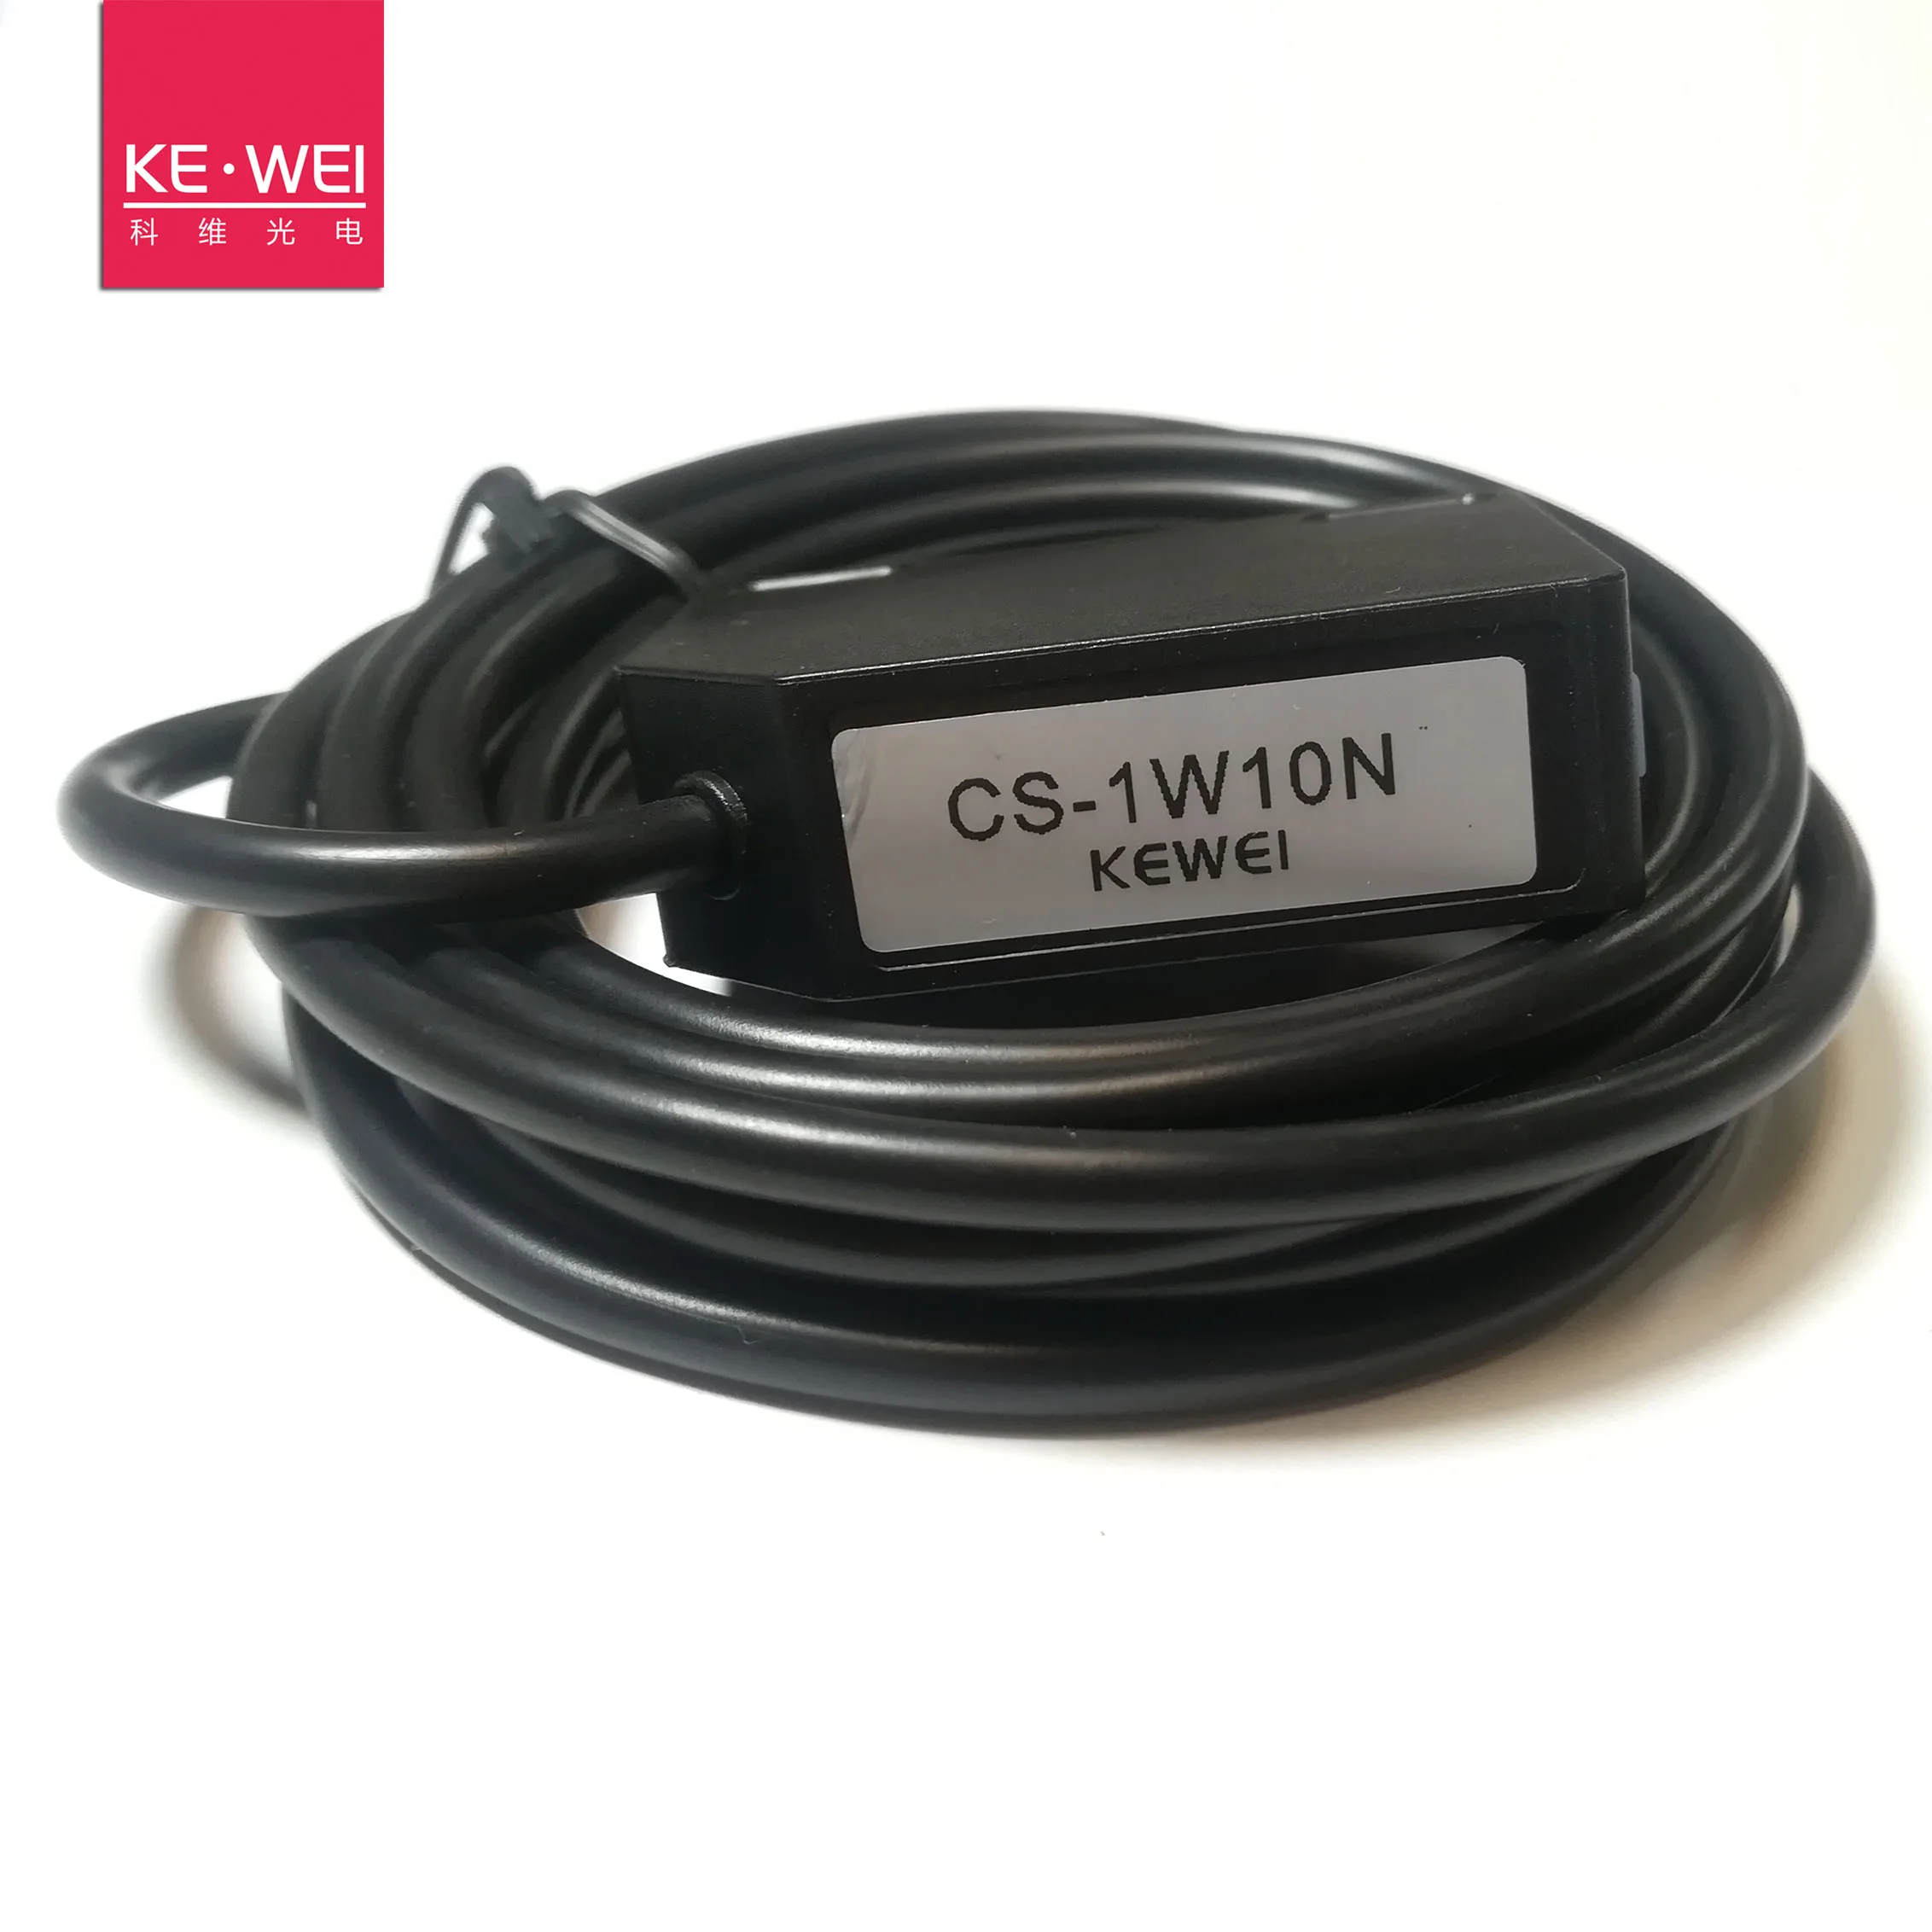 

Color Code Photoelectric Switch CS-1W10 Button Teaching Is Simple, Durable and Stable to Distinguish Any Two Colors